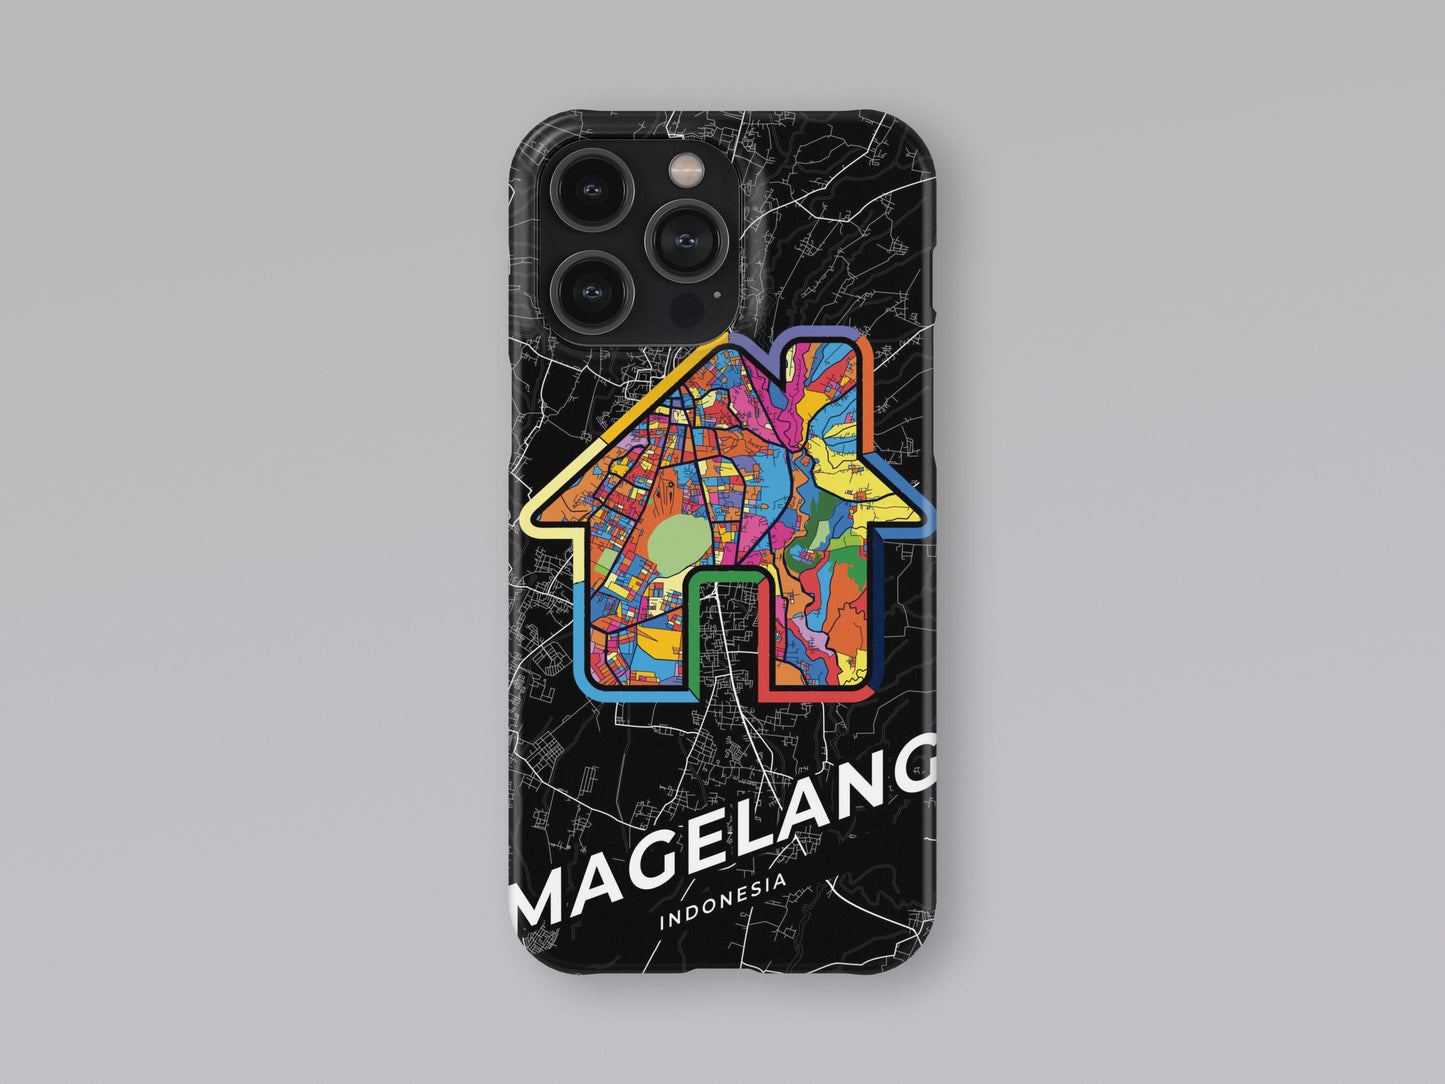 Magelang Indonesia slim phone case with colorful icon. Birthday, wedding or housewarming gift. Couple match cases. 3